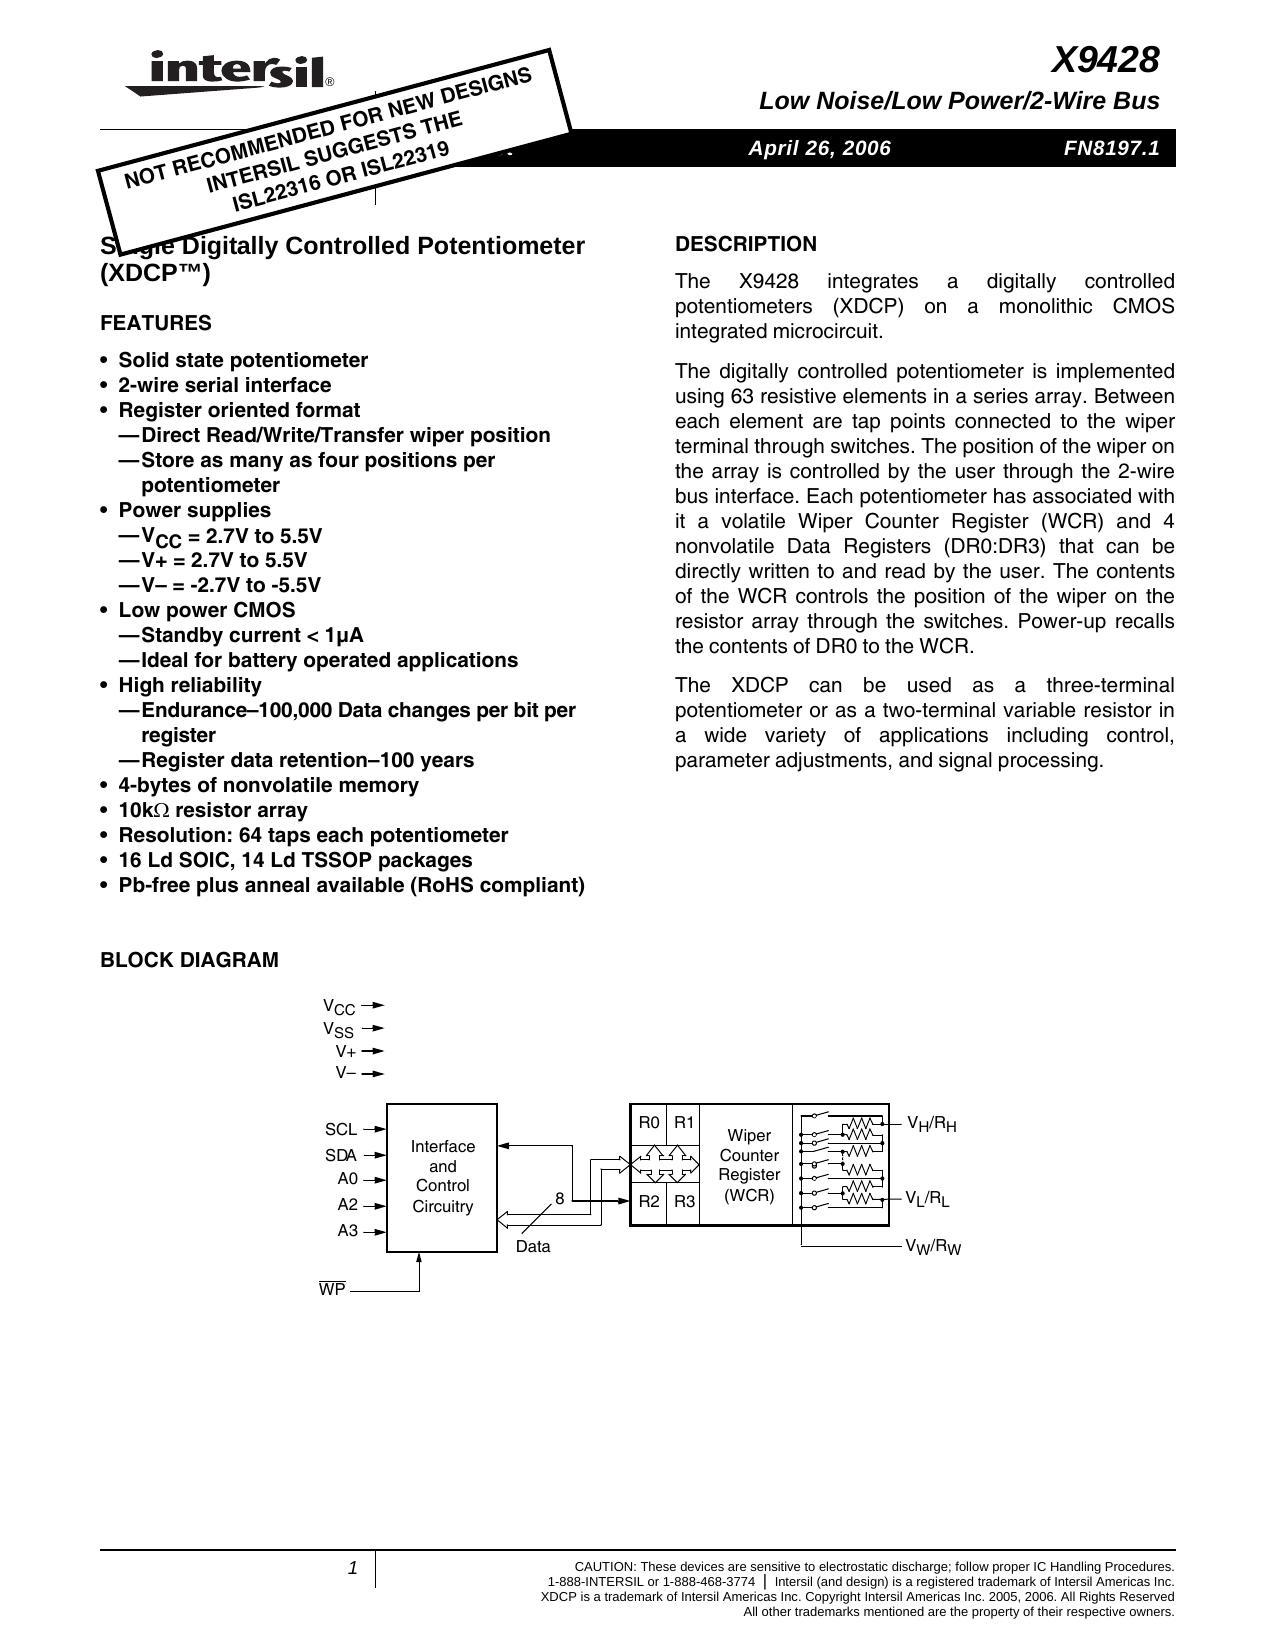 x9428-low-noise-low-power-2-wire-bus-digitally-controlled-potentiometer-xdcp.pdf